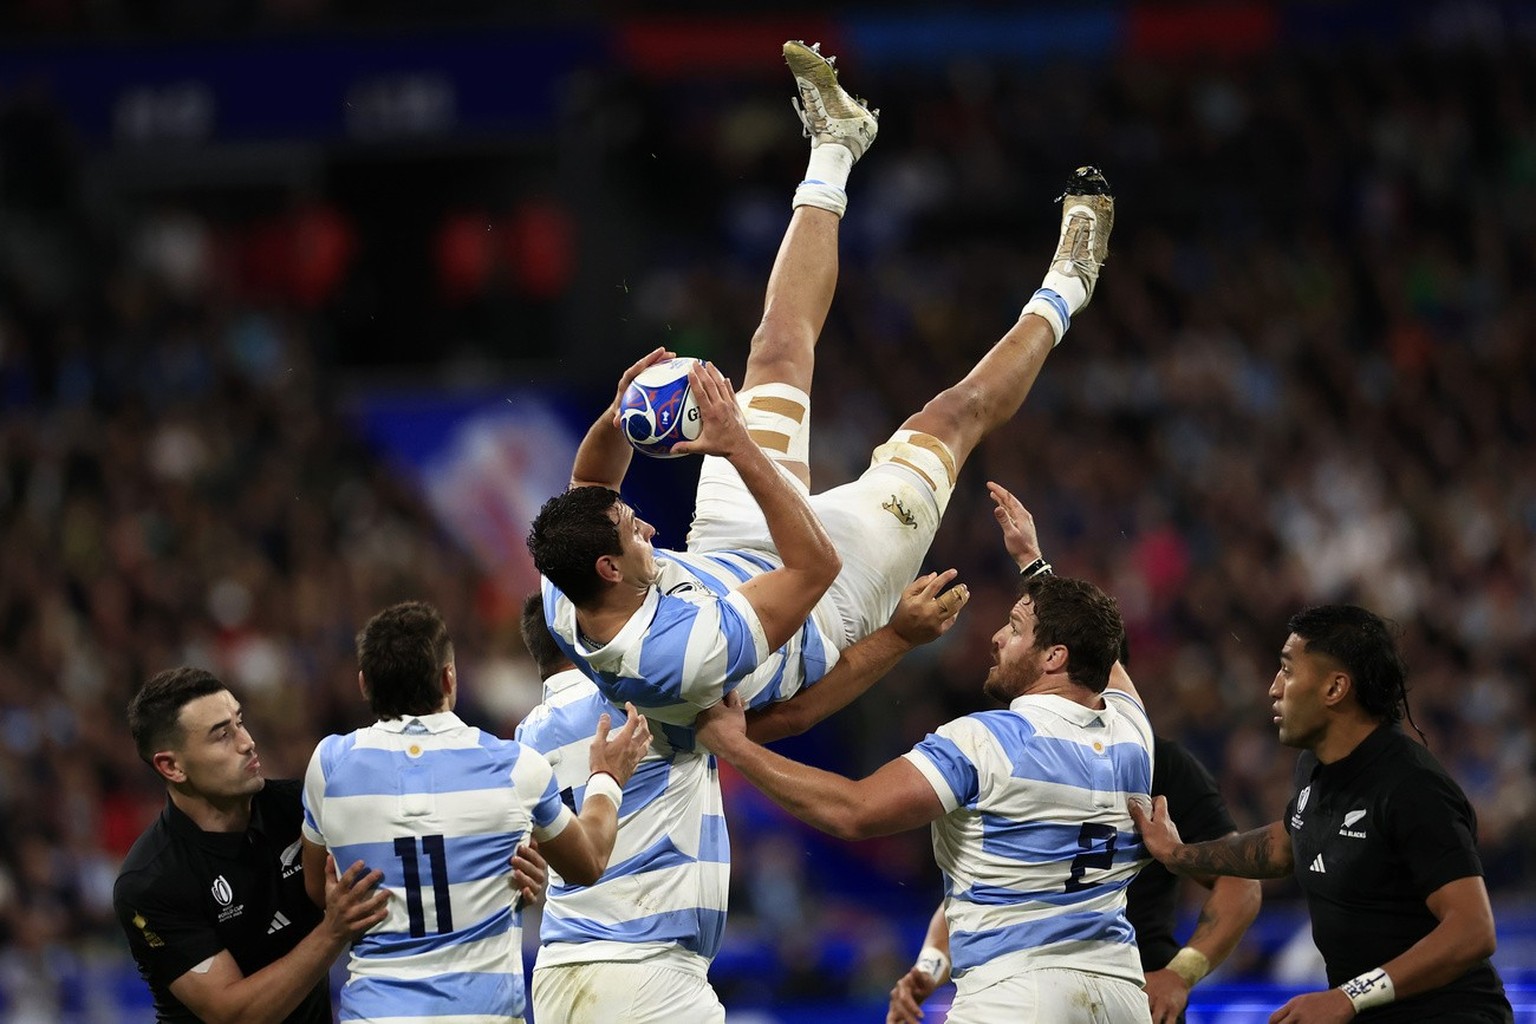 Argentina&#039;s Juan Martin Gonzalez, top, catches the ball during the Rugby World Cup semifinal match between Argentina and New Zealand at the Stade de France in Saint-Denis, outside Paris, Friday,  ...